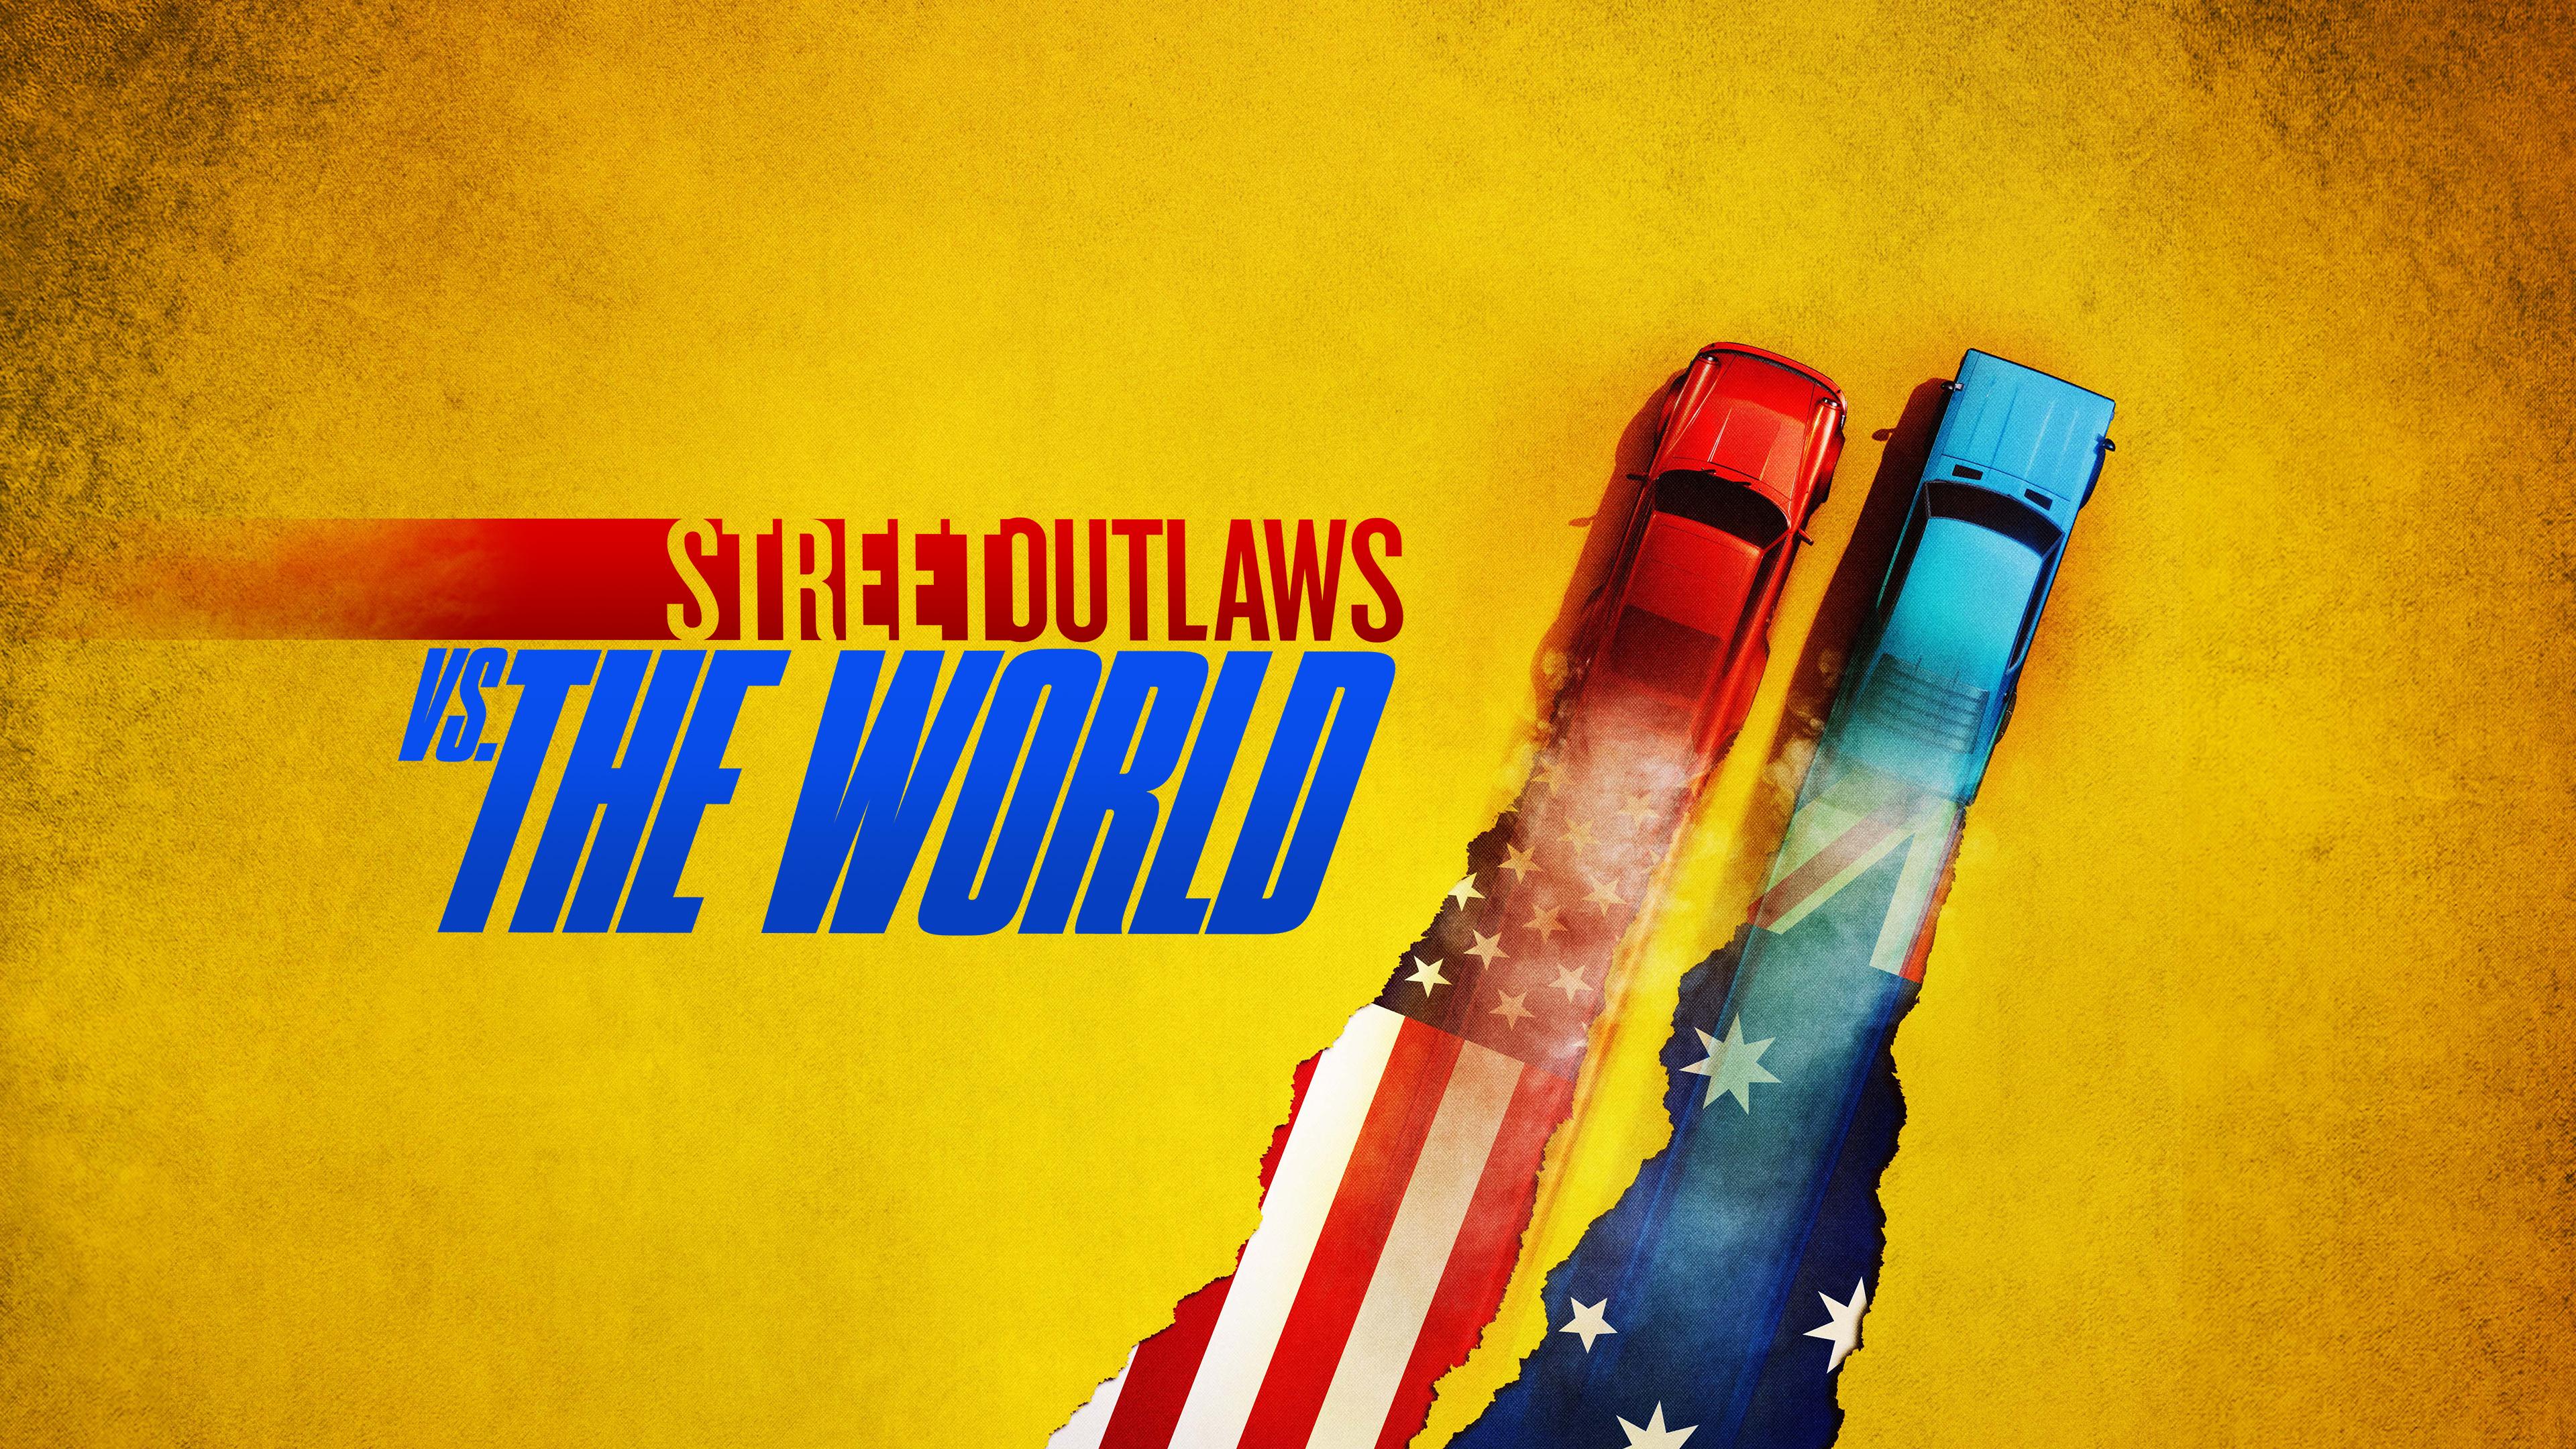 Watch Street Outlaws vs. the World Streaming Online on Philo (Free Trial)